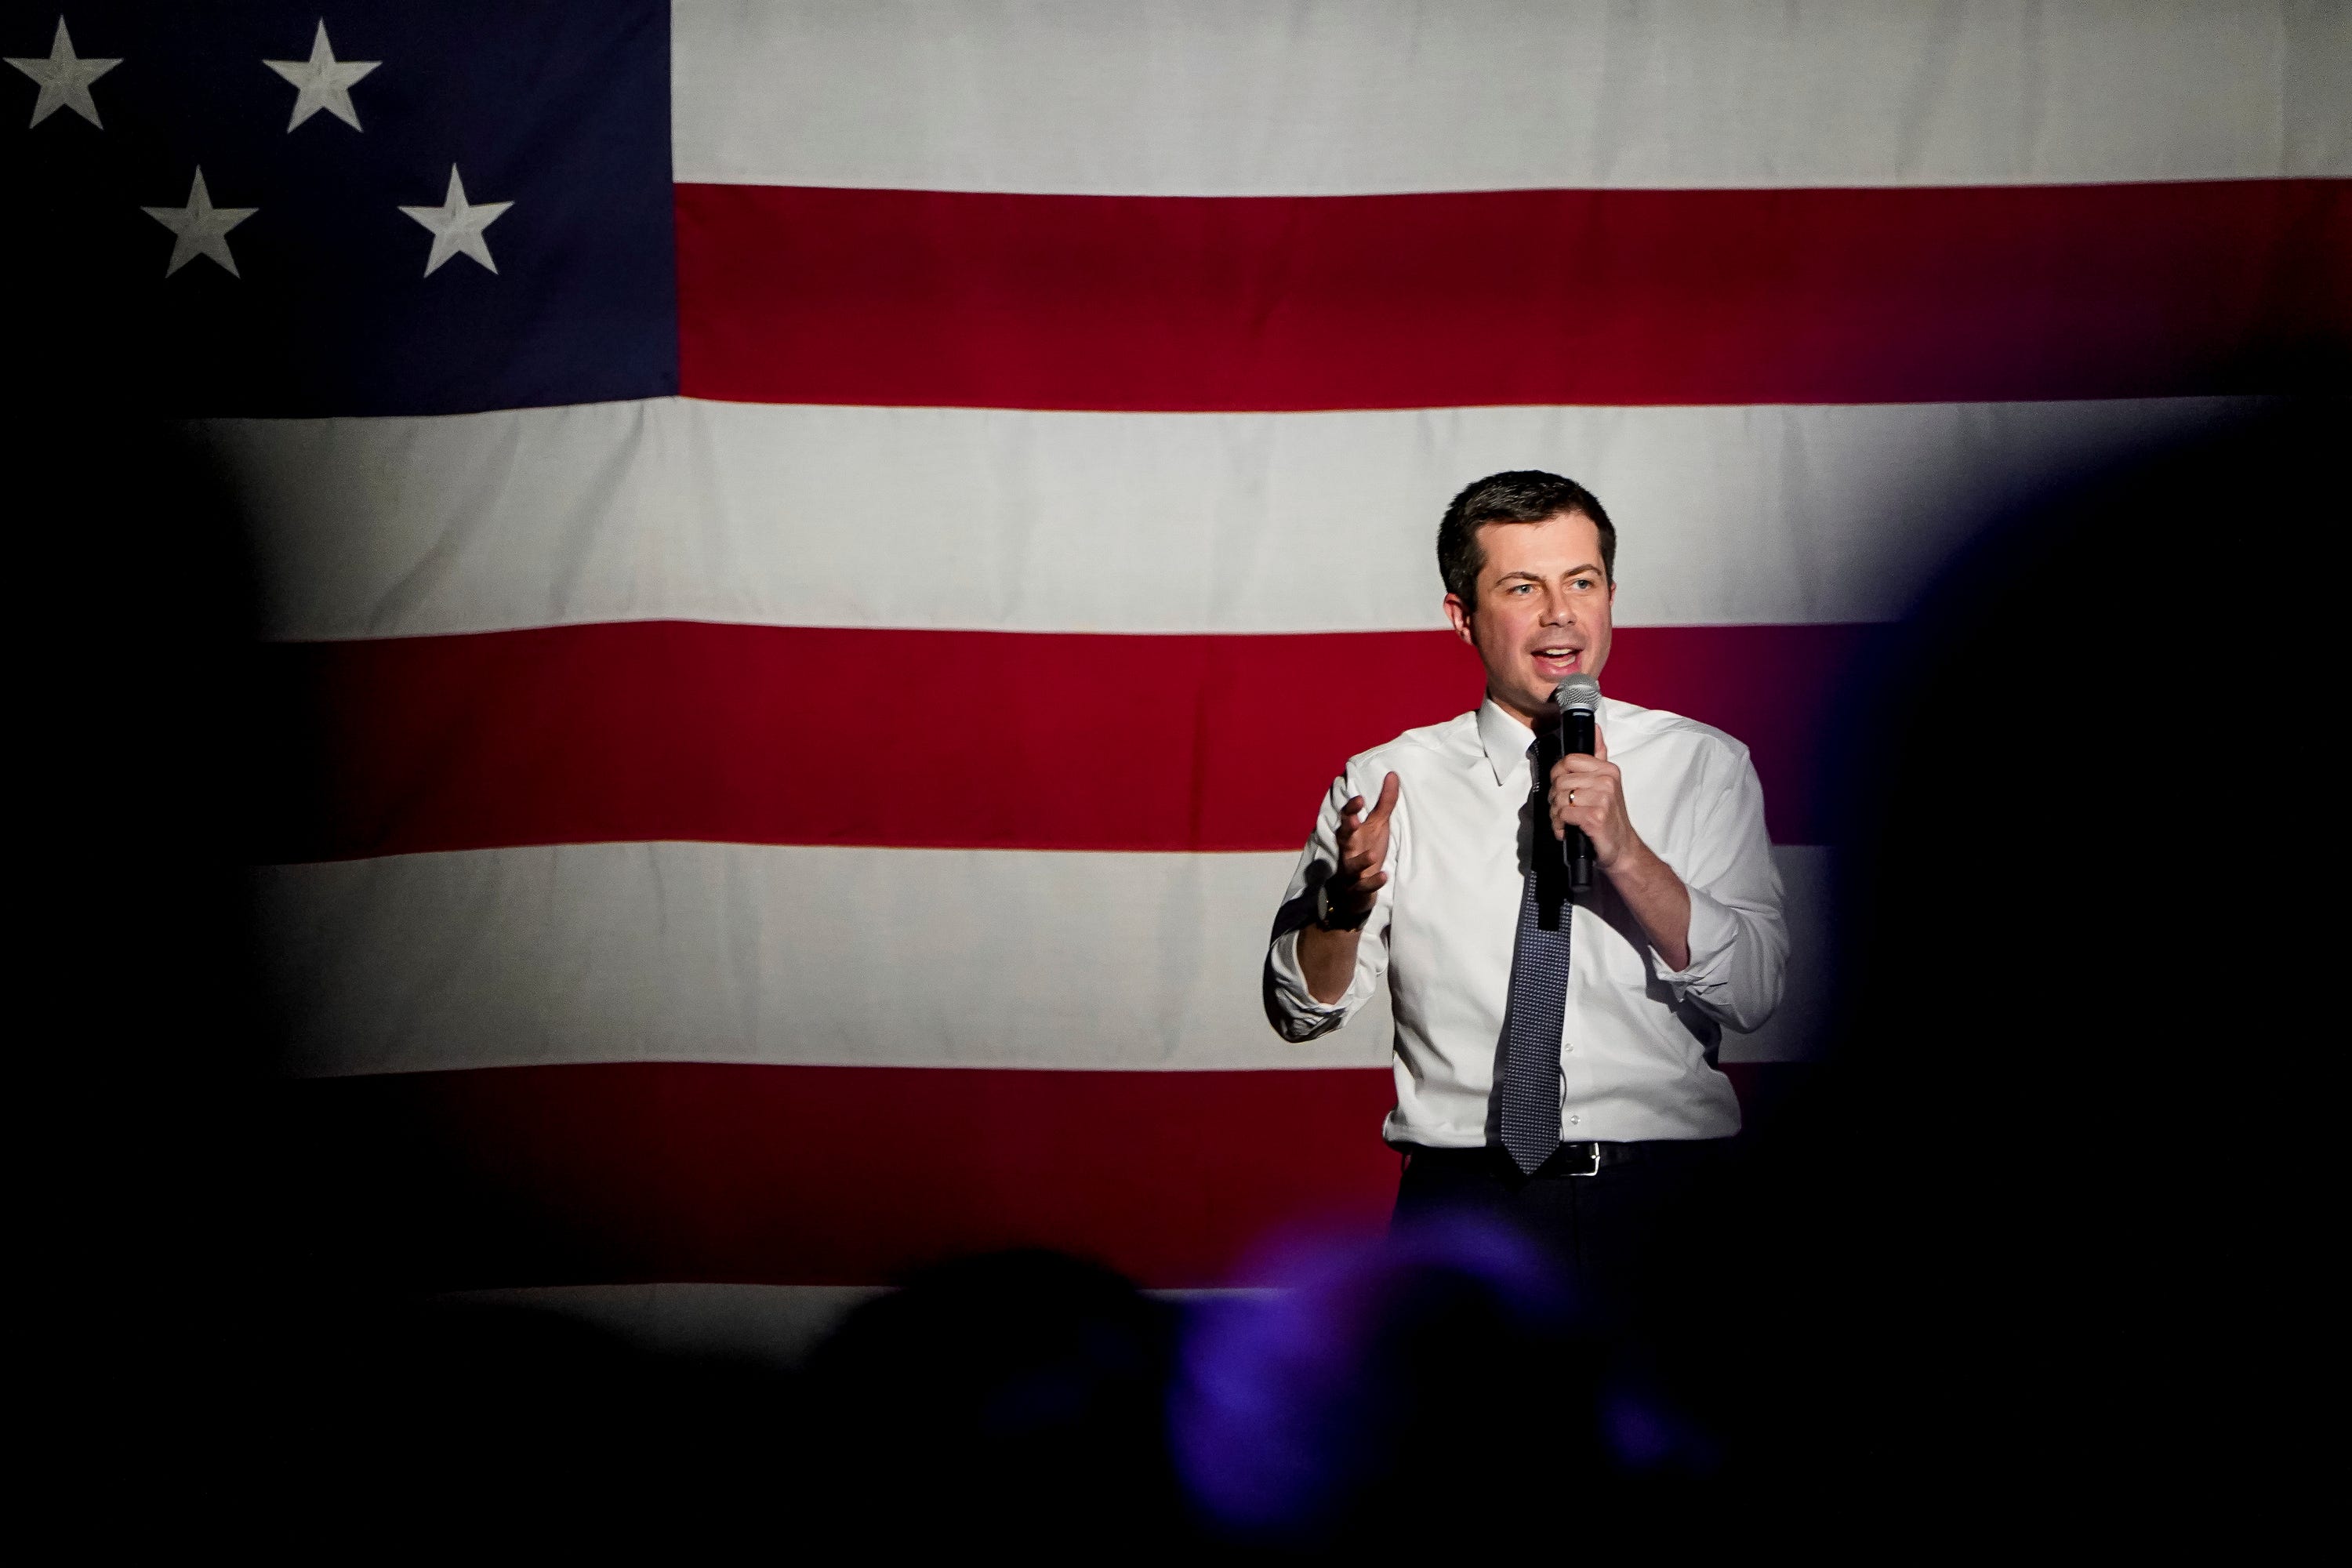 In this Monday, Feb. 17, 2020 photo, Democratic presidential candidate Pete Buttigieg speaks at The Union Event Center in Salt Lake City.